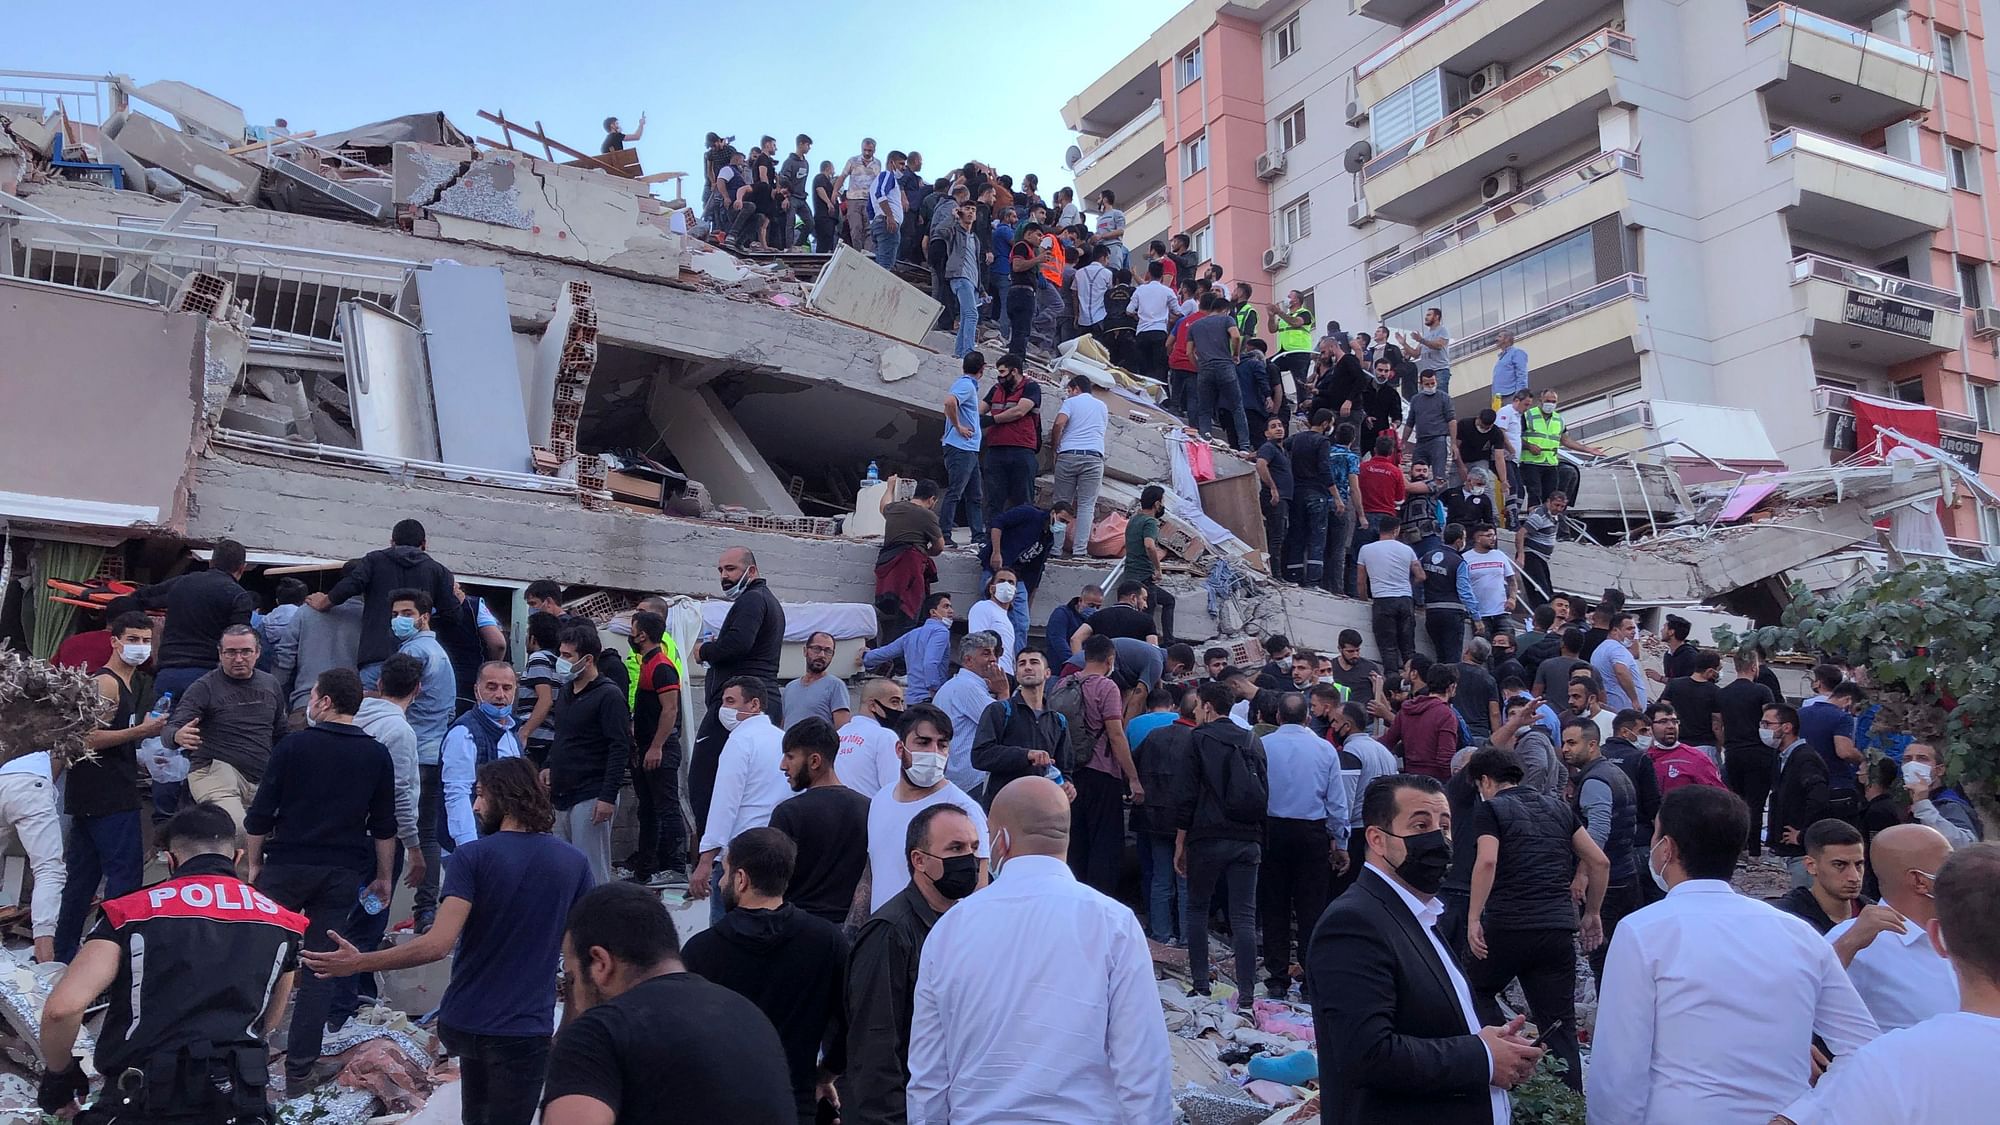 Rescue workers and local people try to reach residents trapped in the debris of a collapsed building, in Izmir, Turkey, Friday, 30 October 2020, after a strong earthquake in the Aegean Sea hit Turkey and Greece.